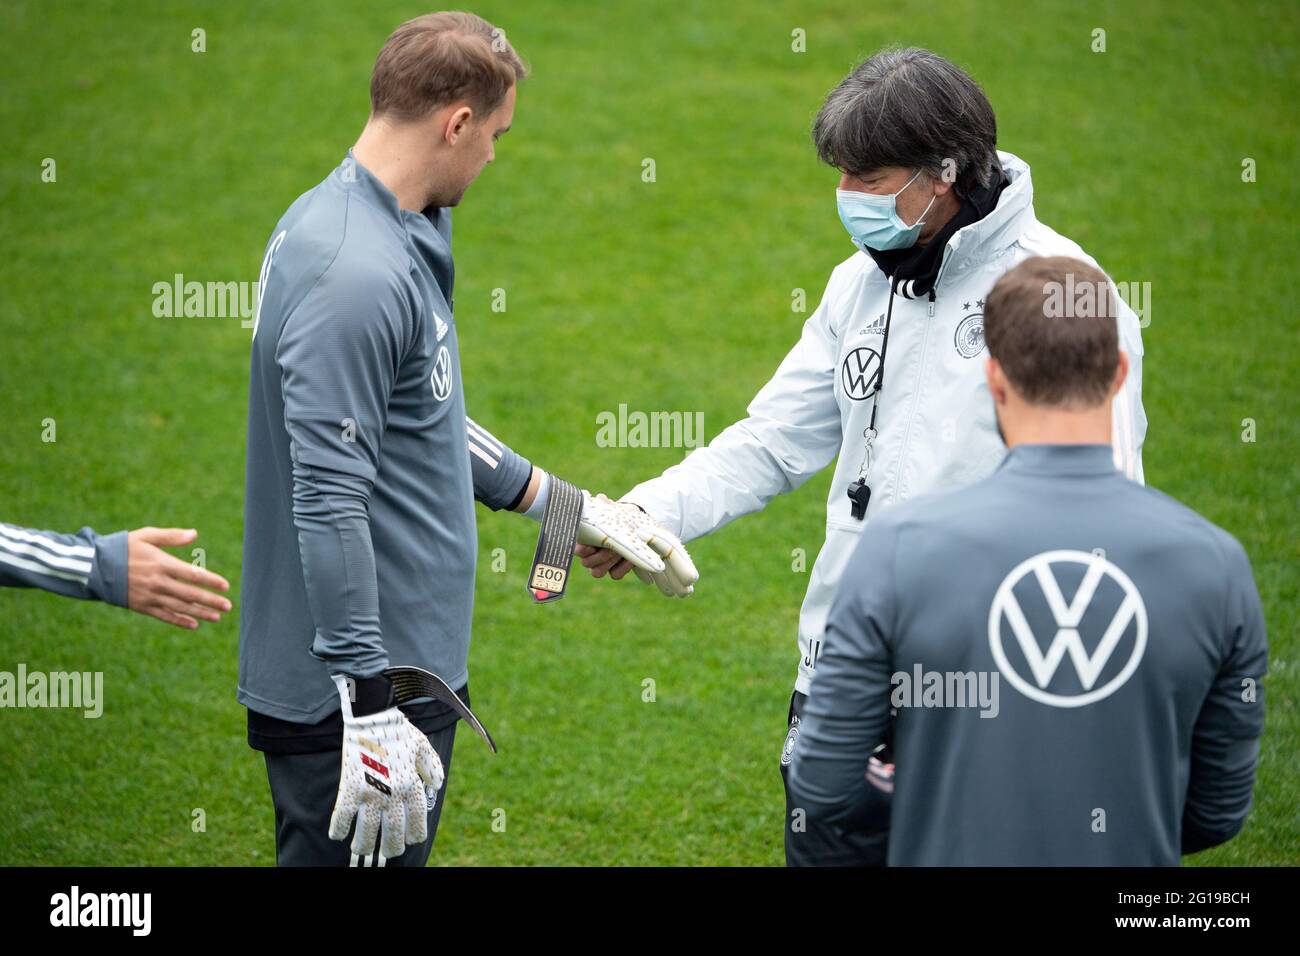 Seefeld, Austria. 06th June, 2021. Football: National team, training camp.  Germany's goalkeeper Manuel Neuer shows national coach Joachim Löw his  goalkeeper gloves, which he received for his 100th international match.  Credit: Federico